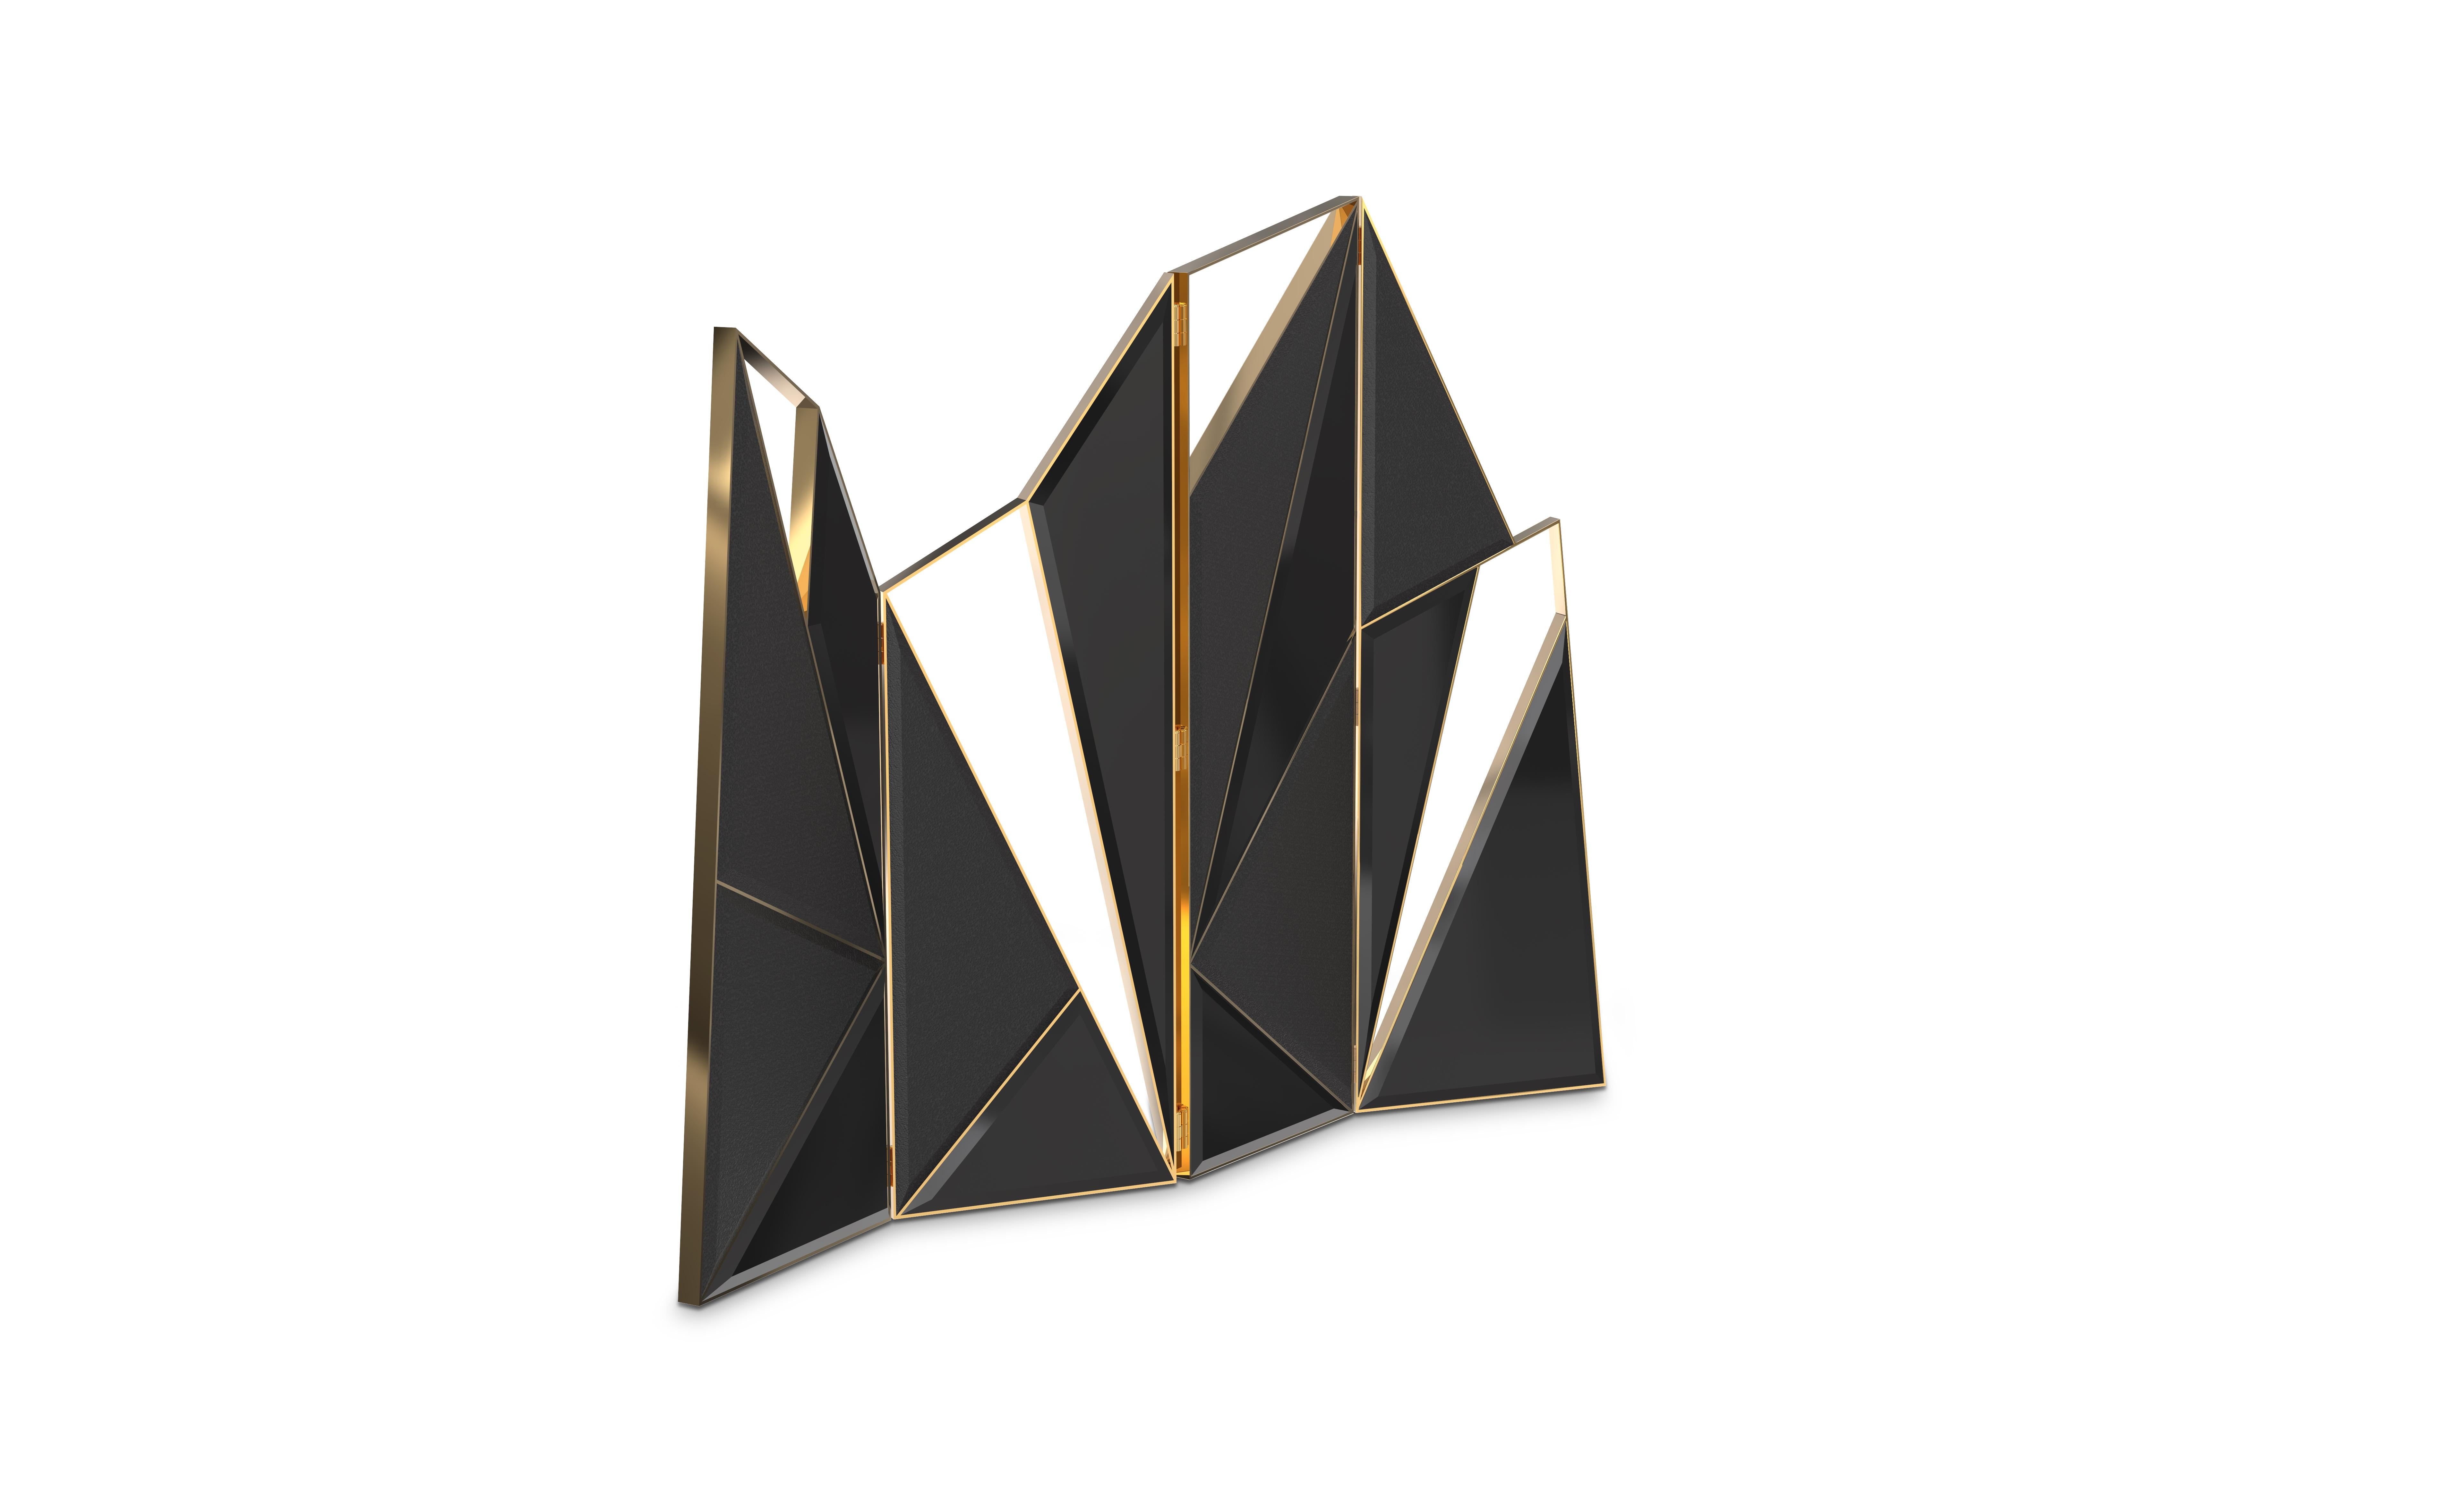 Delta screen explodes with a dramatic but elegant black, noting a sensual geometry in the flow of the four panels. This unique folding screen is perfectly wrapped in polished brass and black lacquered wood and adorned with black leather. Unleash the